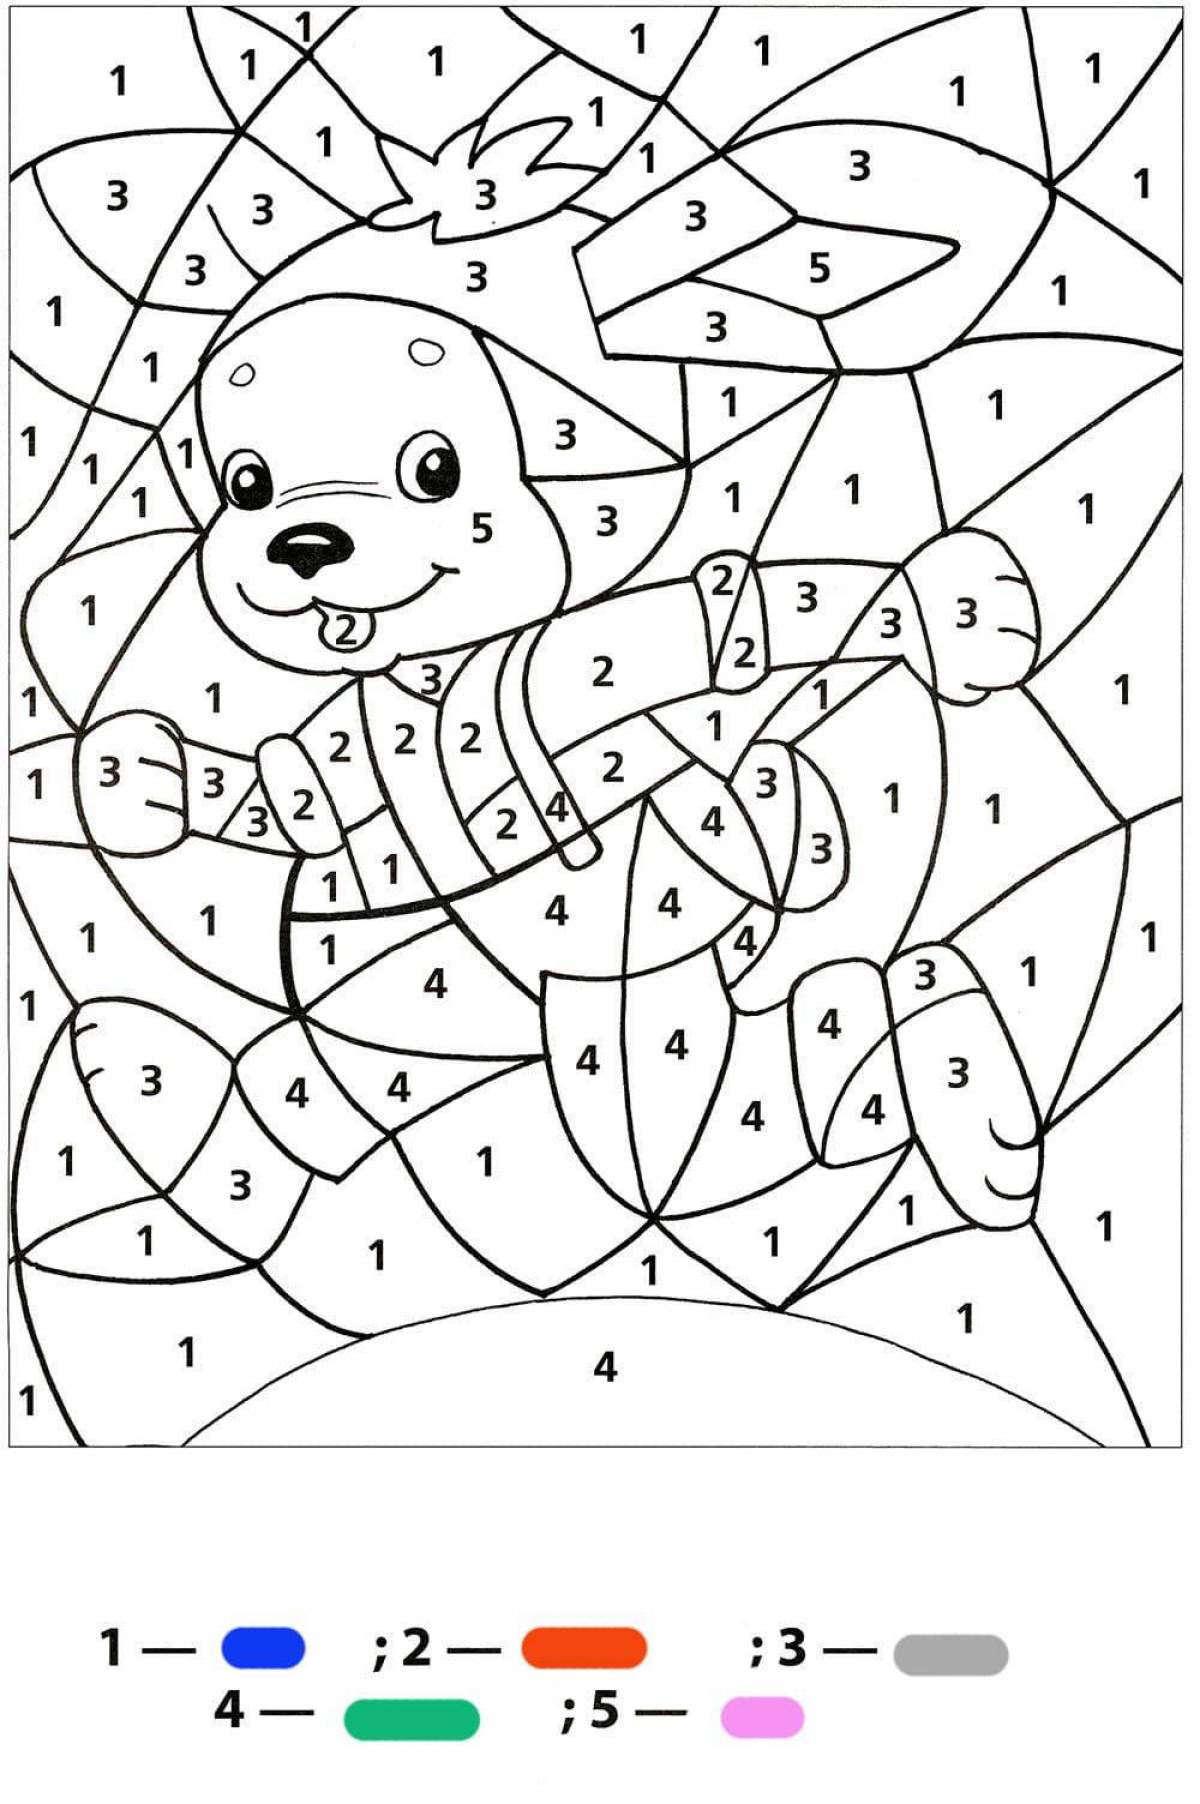 Creative coloring by numbers for children 5-7 years old